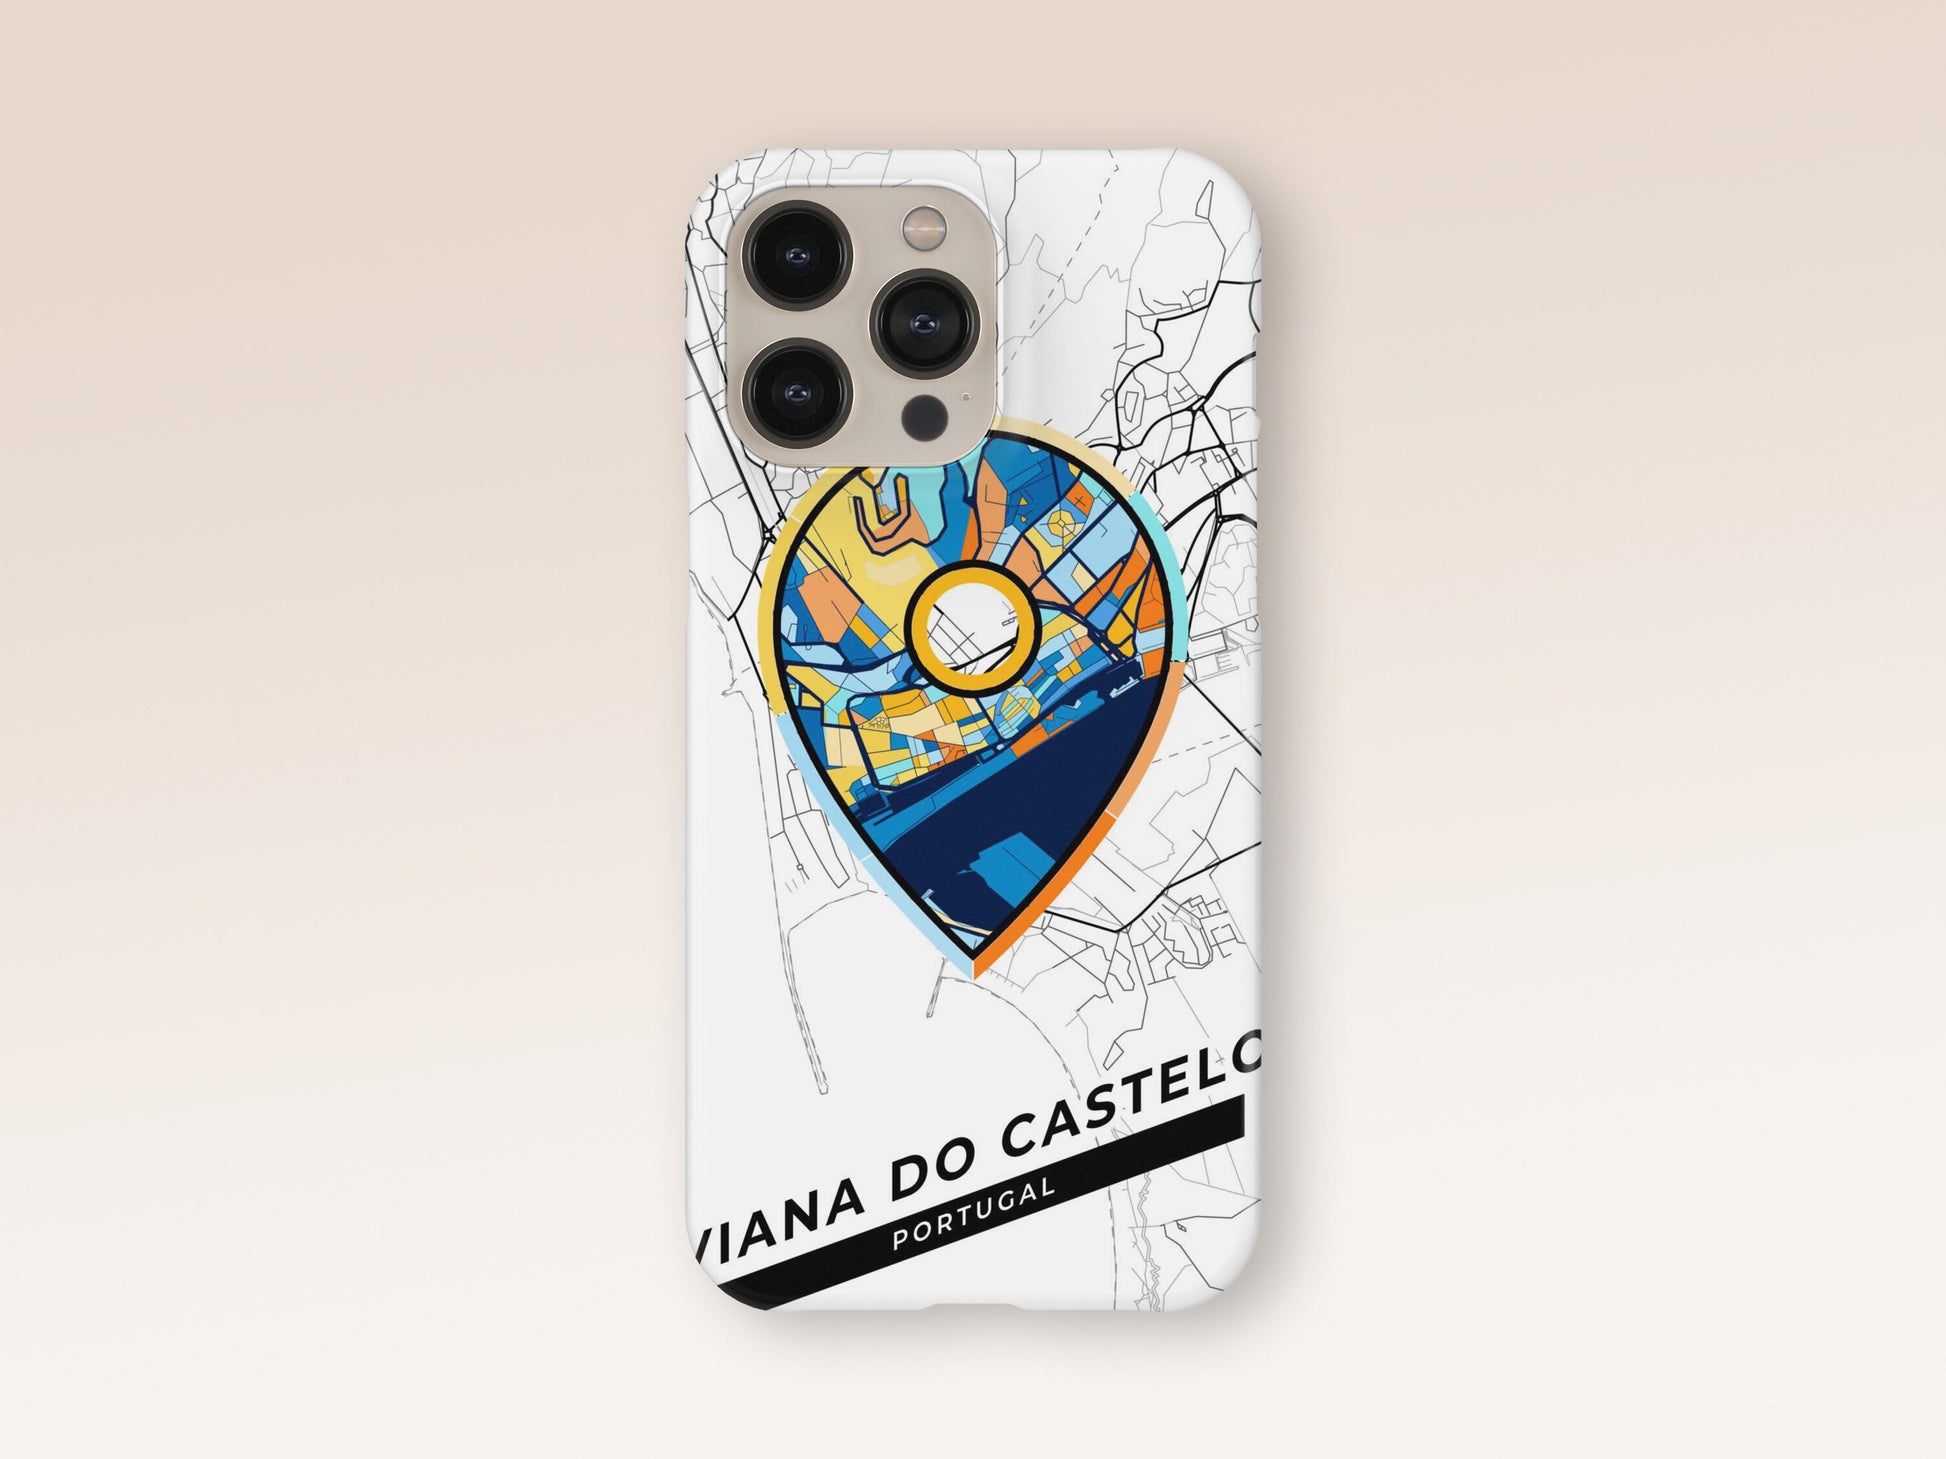 Viana Do Castelo Portugal slim phone case with colorful icon 1